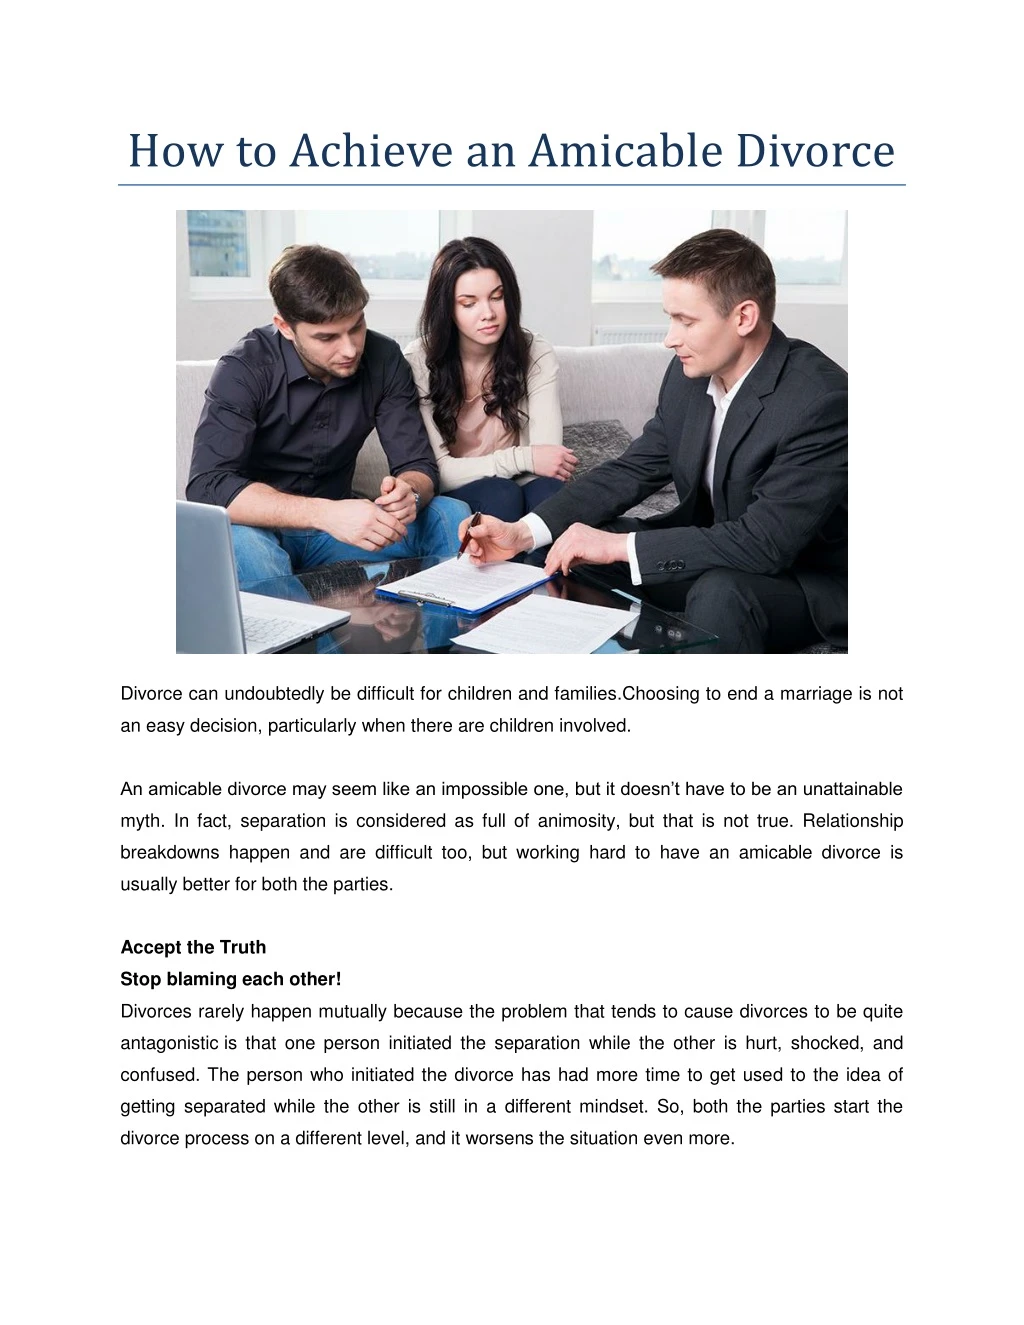 how to achieve an amicable divorce